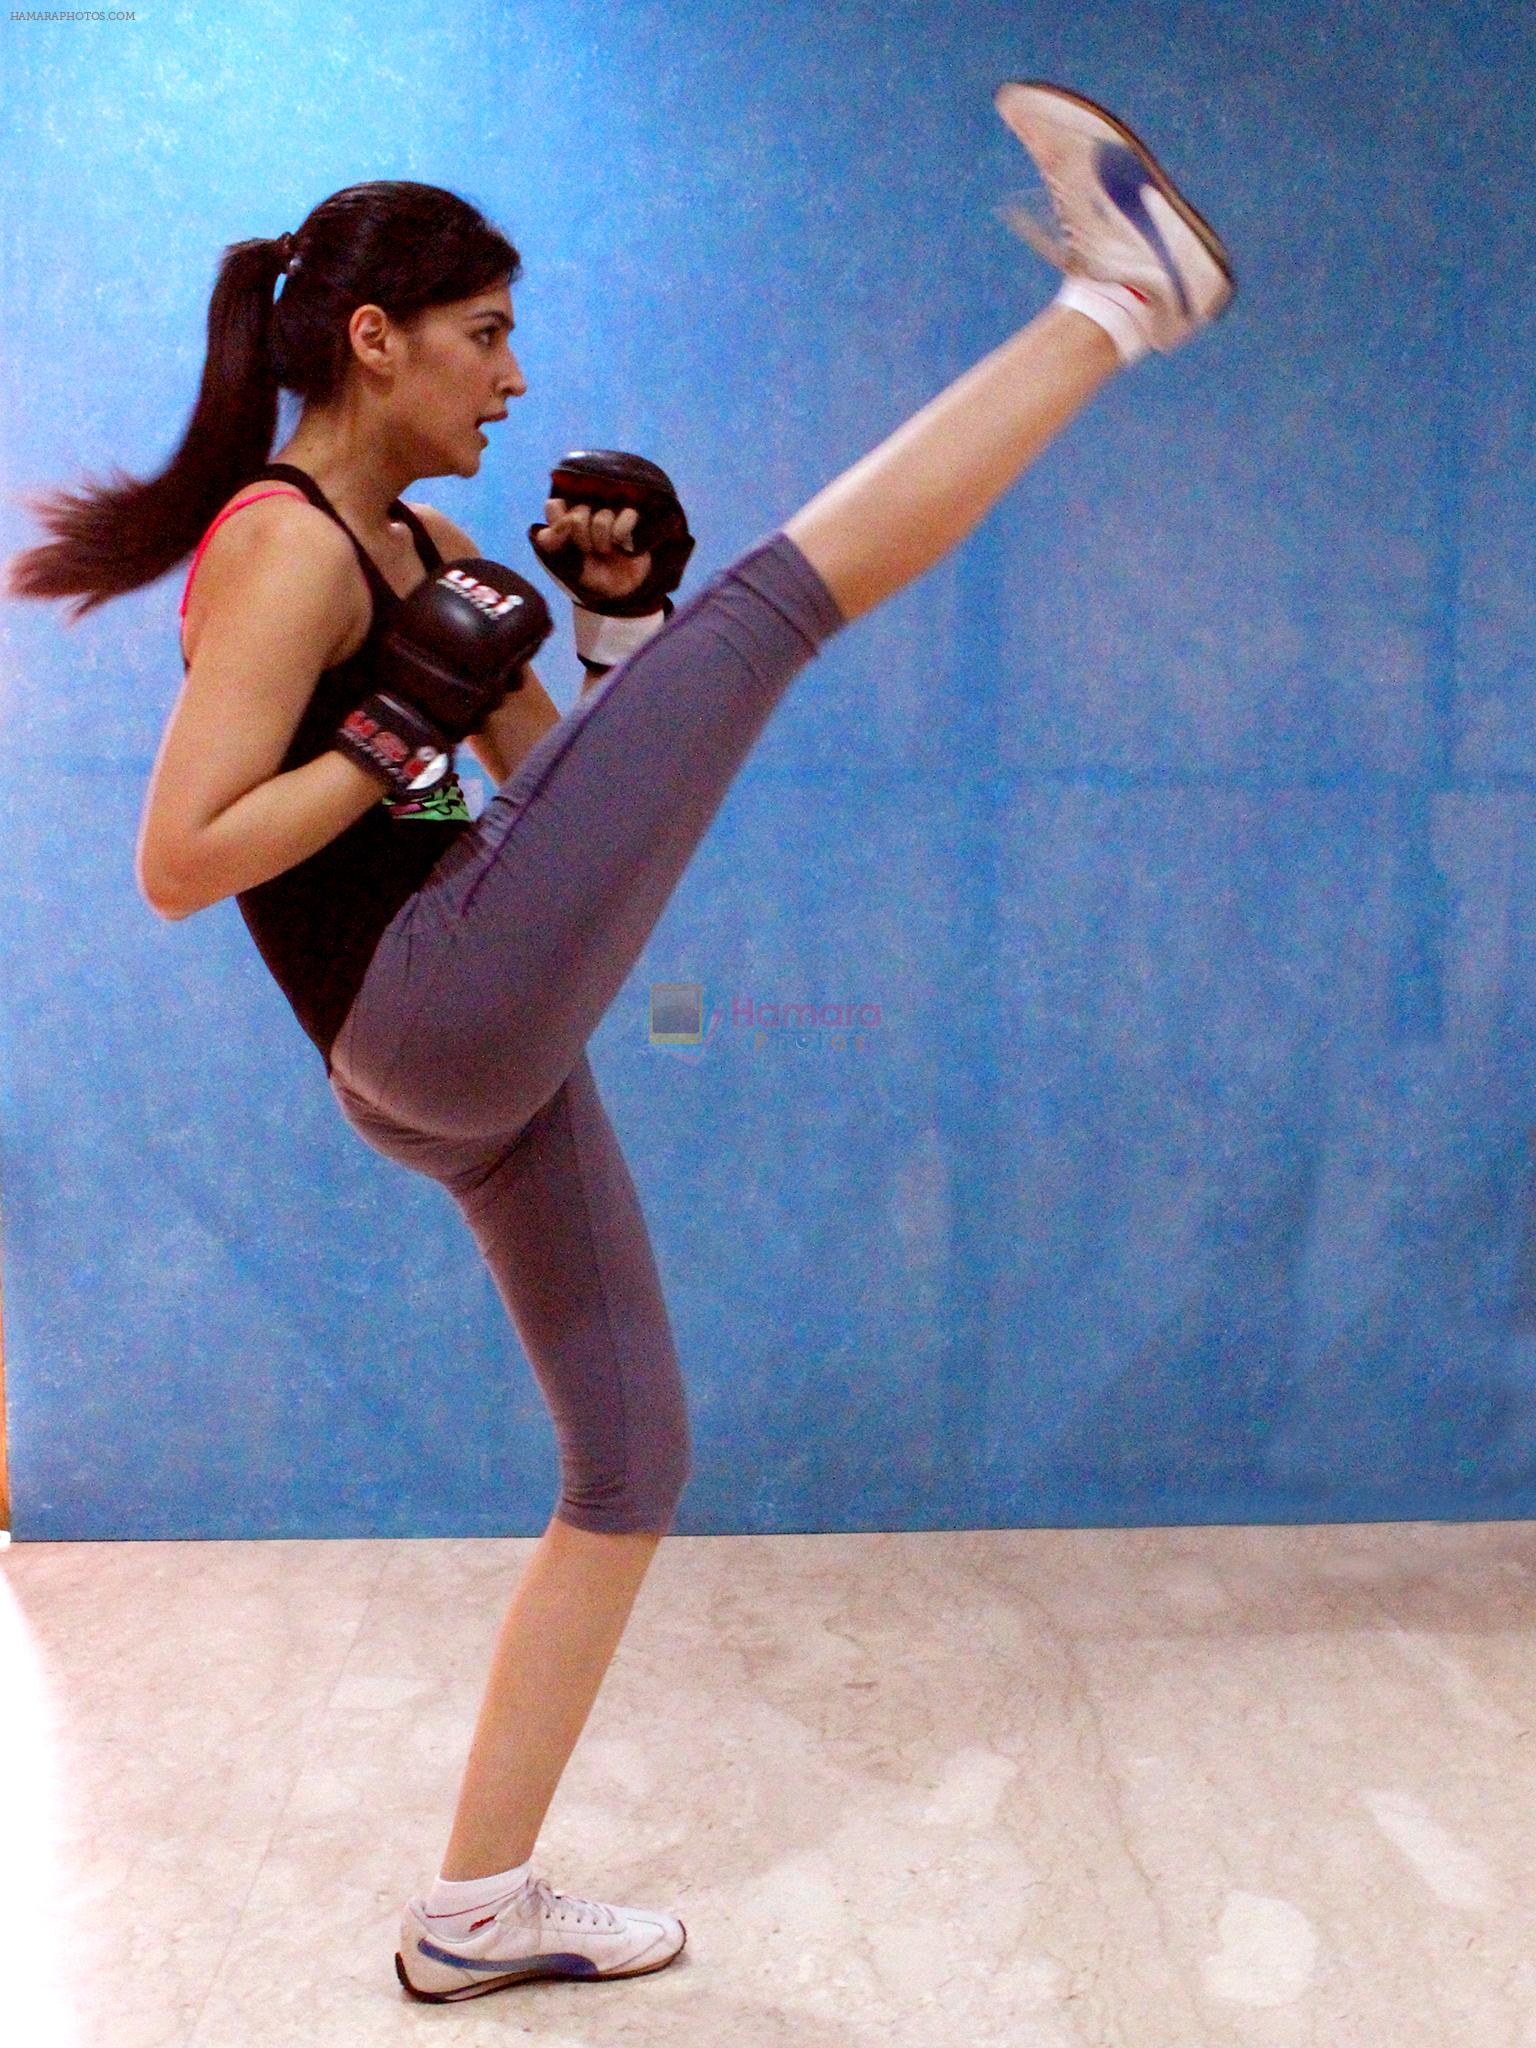 Kriti Sanon practicing an action sequence for her role in the film Singh Is Bling